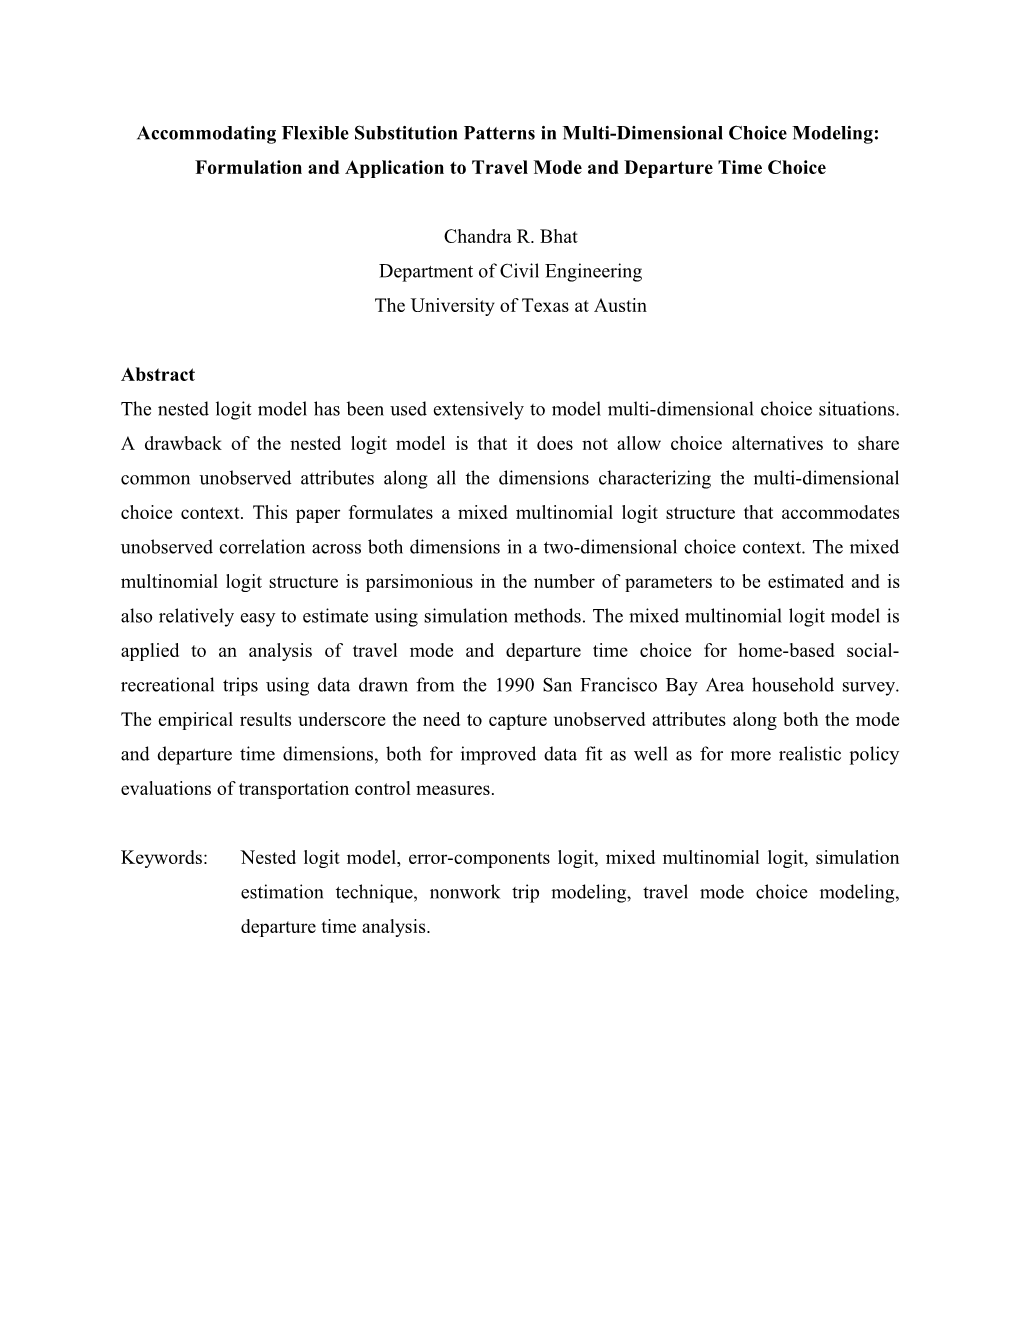 Formulation and Application to Travel Mode and Departure Time Choice